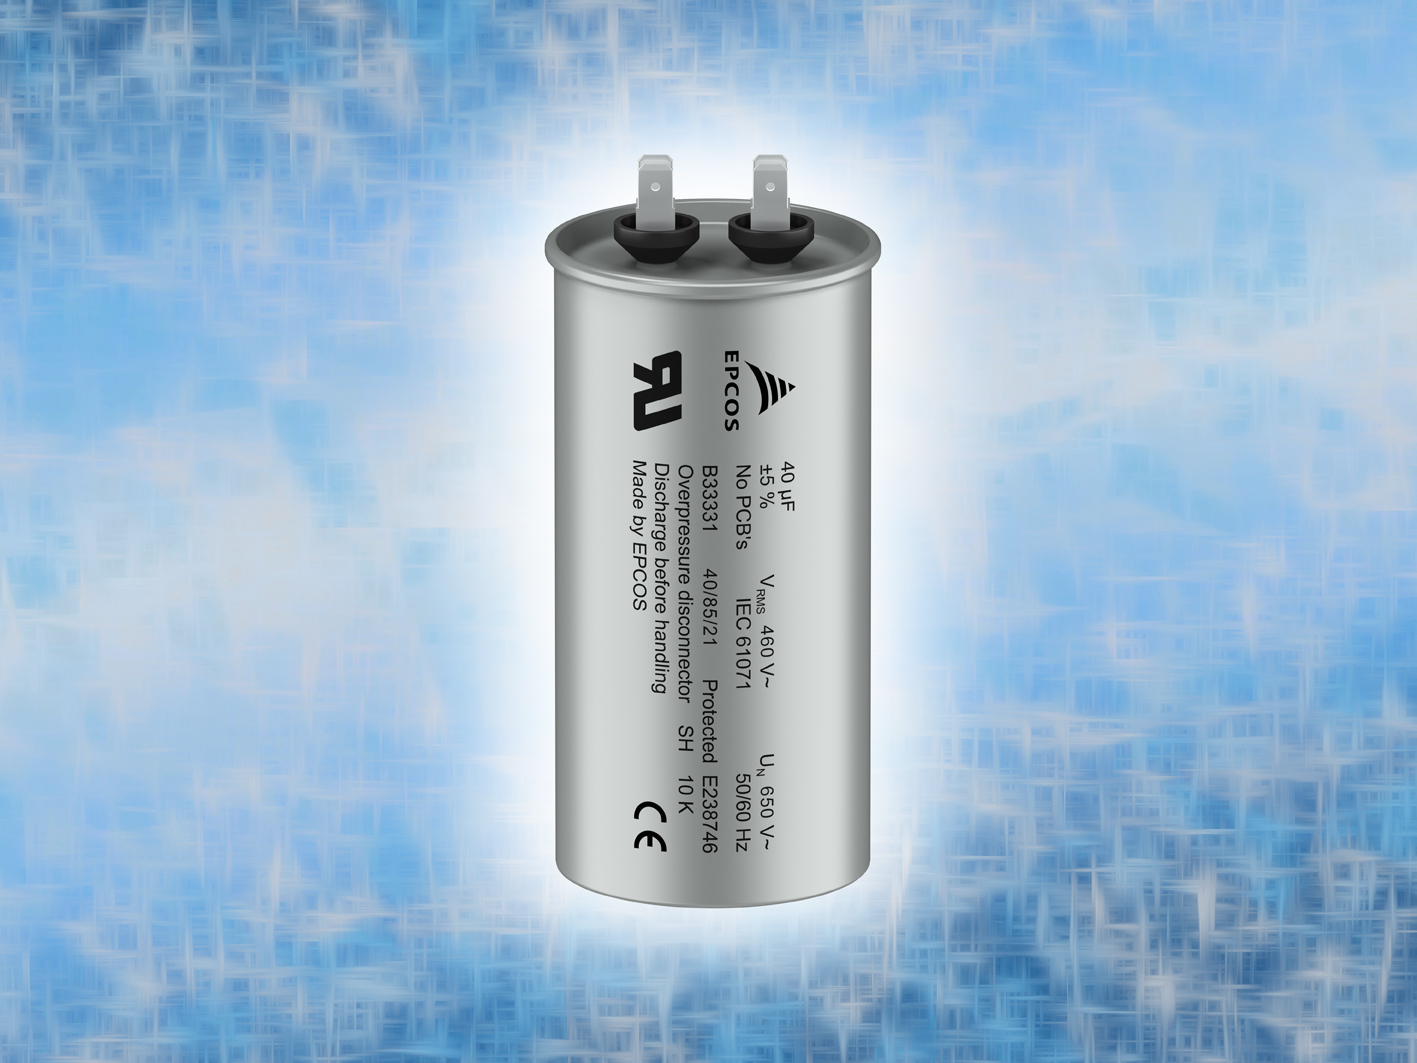 AC Filter Capacitors Include a Peak Voltage of 650 V